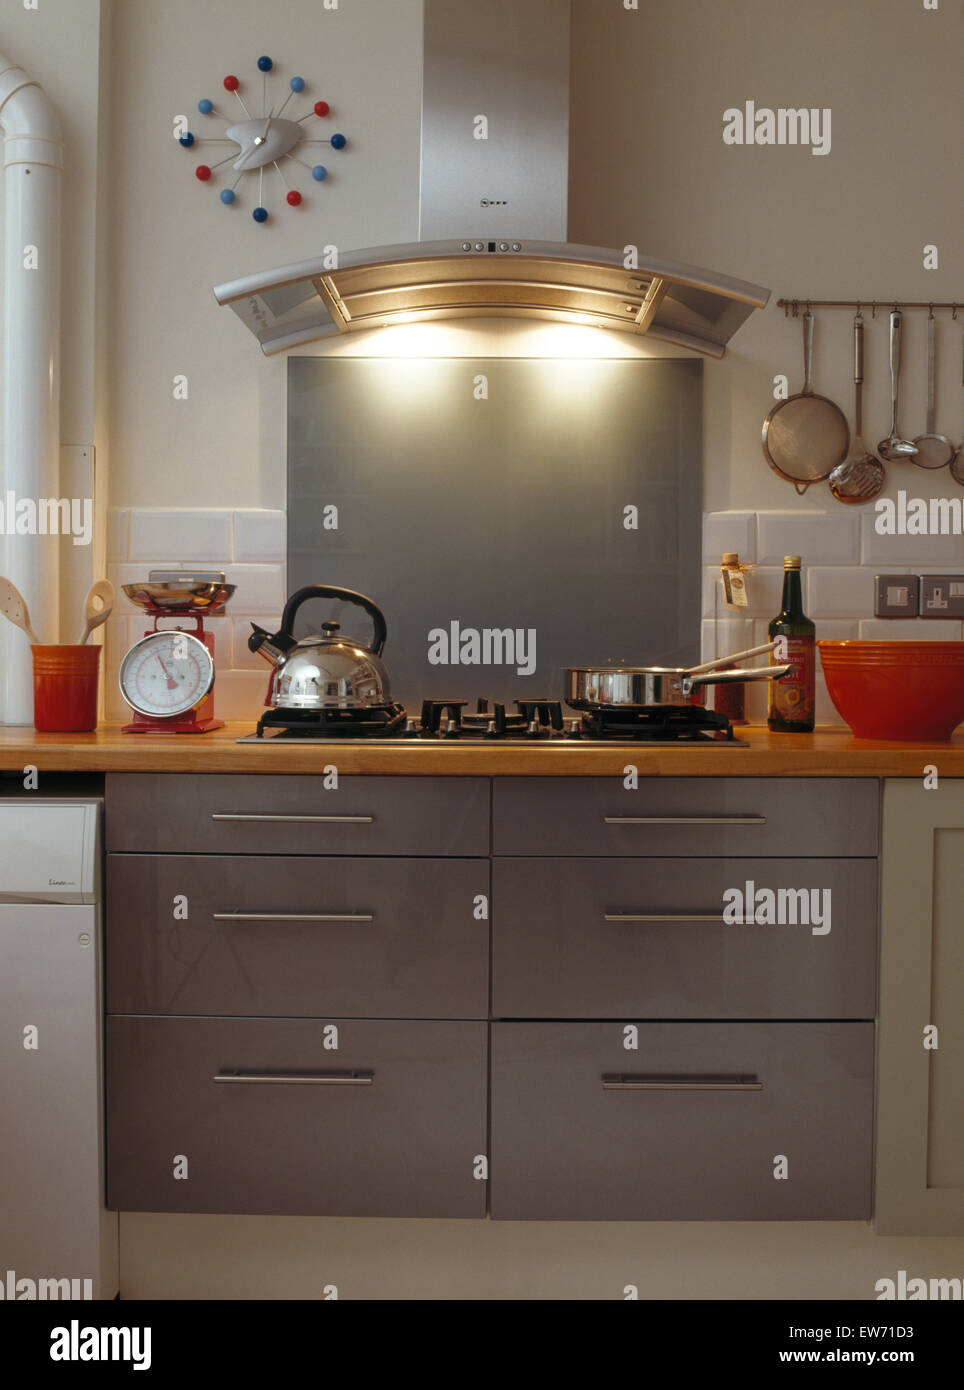 Integral lighting on stainless steel extractor above hob with steel kettle and pans Stock Photo